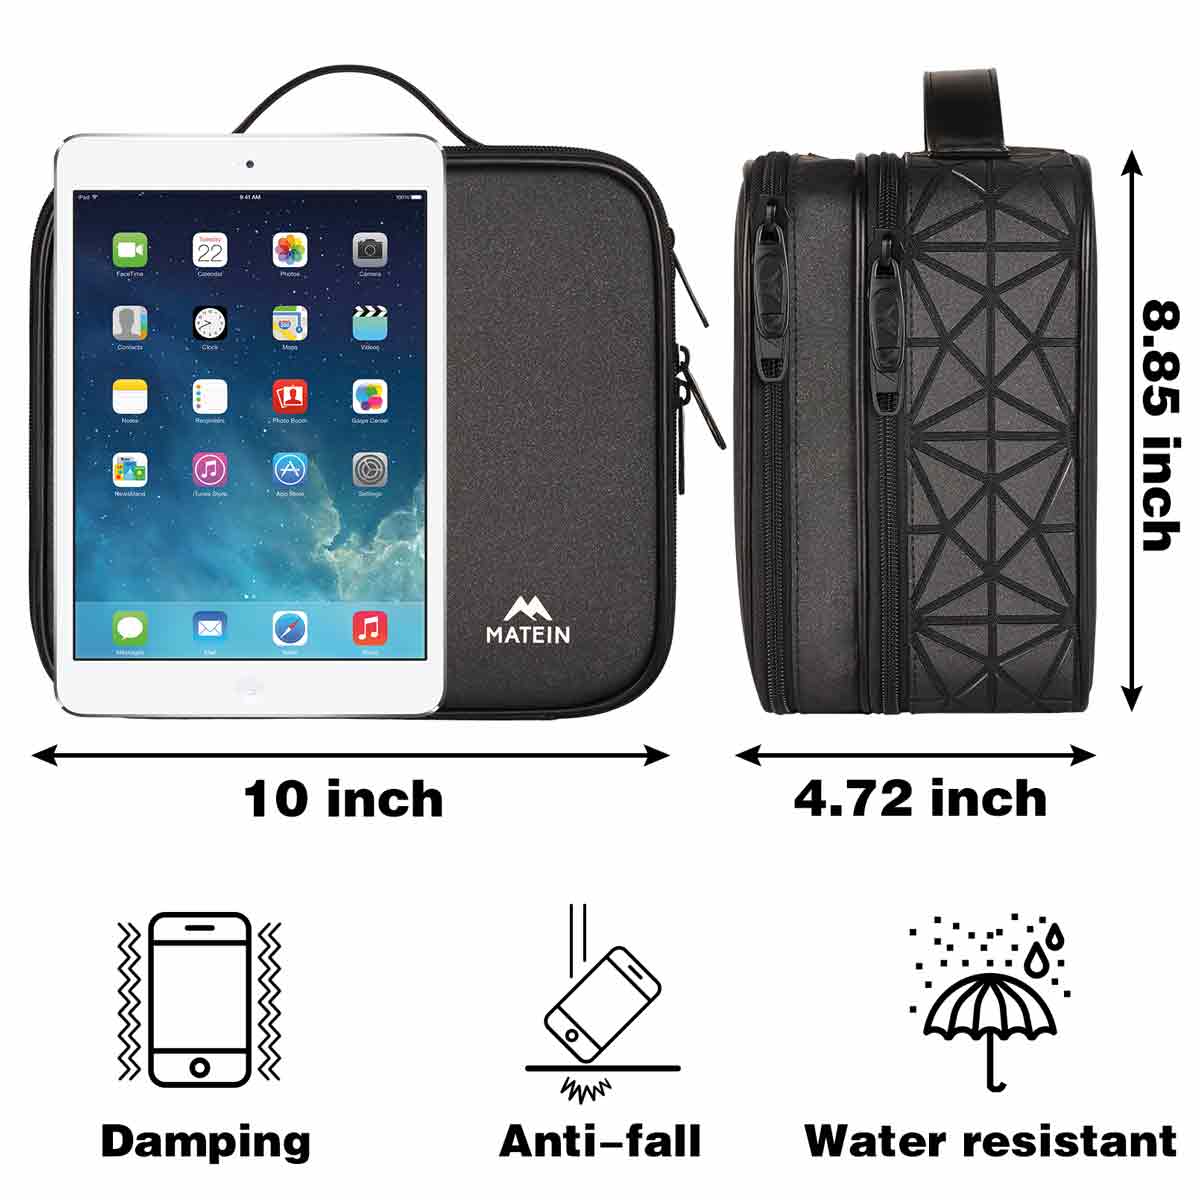 Matein 11 Cable Electronic Carrying Case Organizer Travel Storage